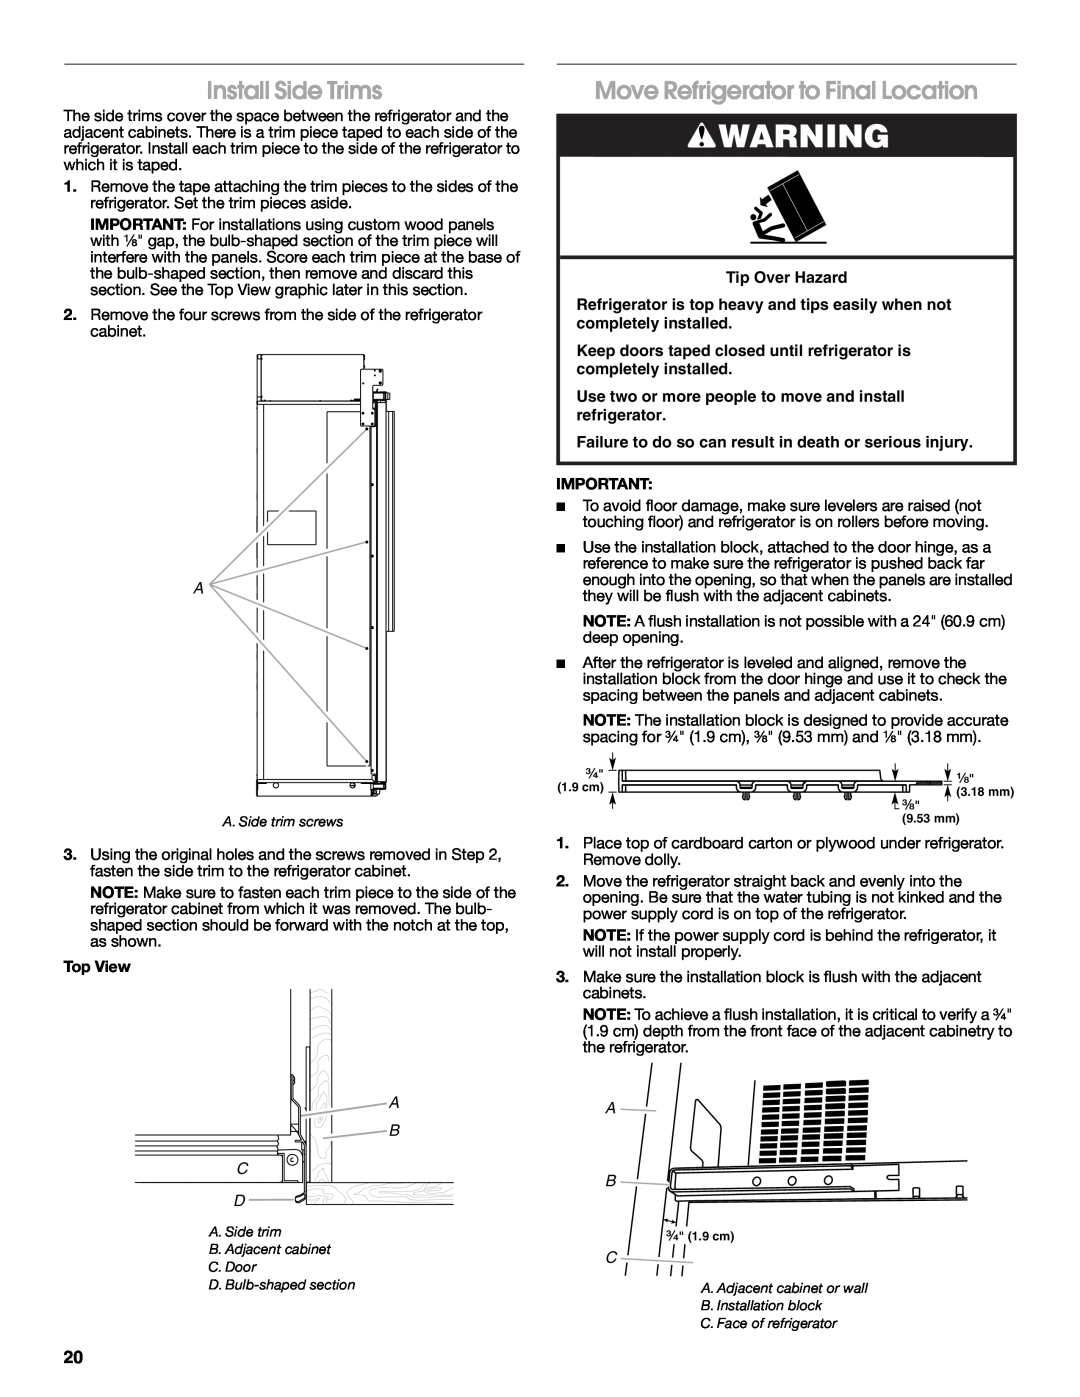 Jenn-Air W10379137A manual Install Side Trims, Move Refrigerator to Final Location 